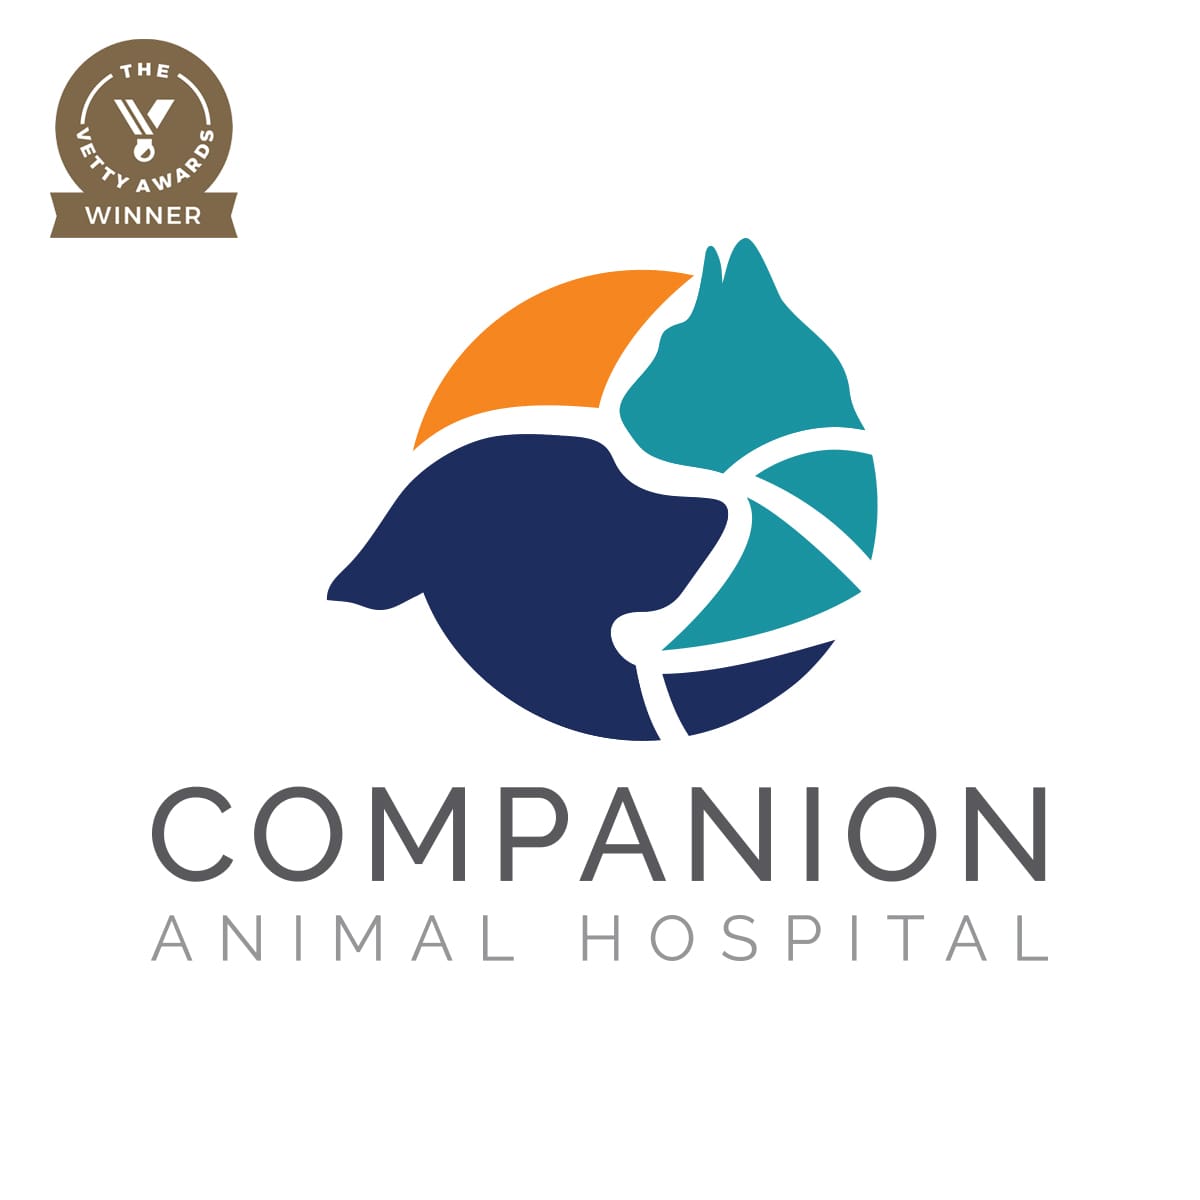 <span style="font-size: 21px;"><strong>Companion<br>Animal Hospital</strong></span><br>
Logo design